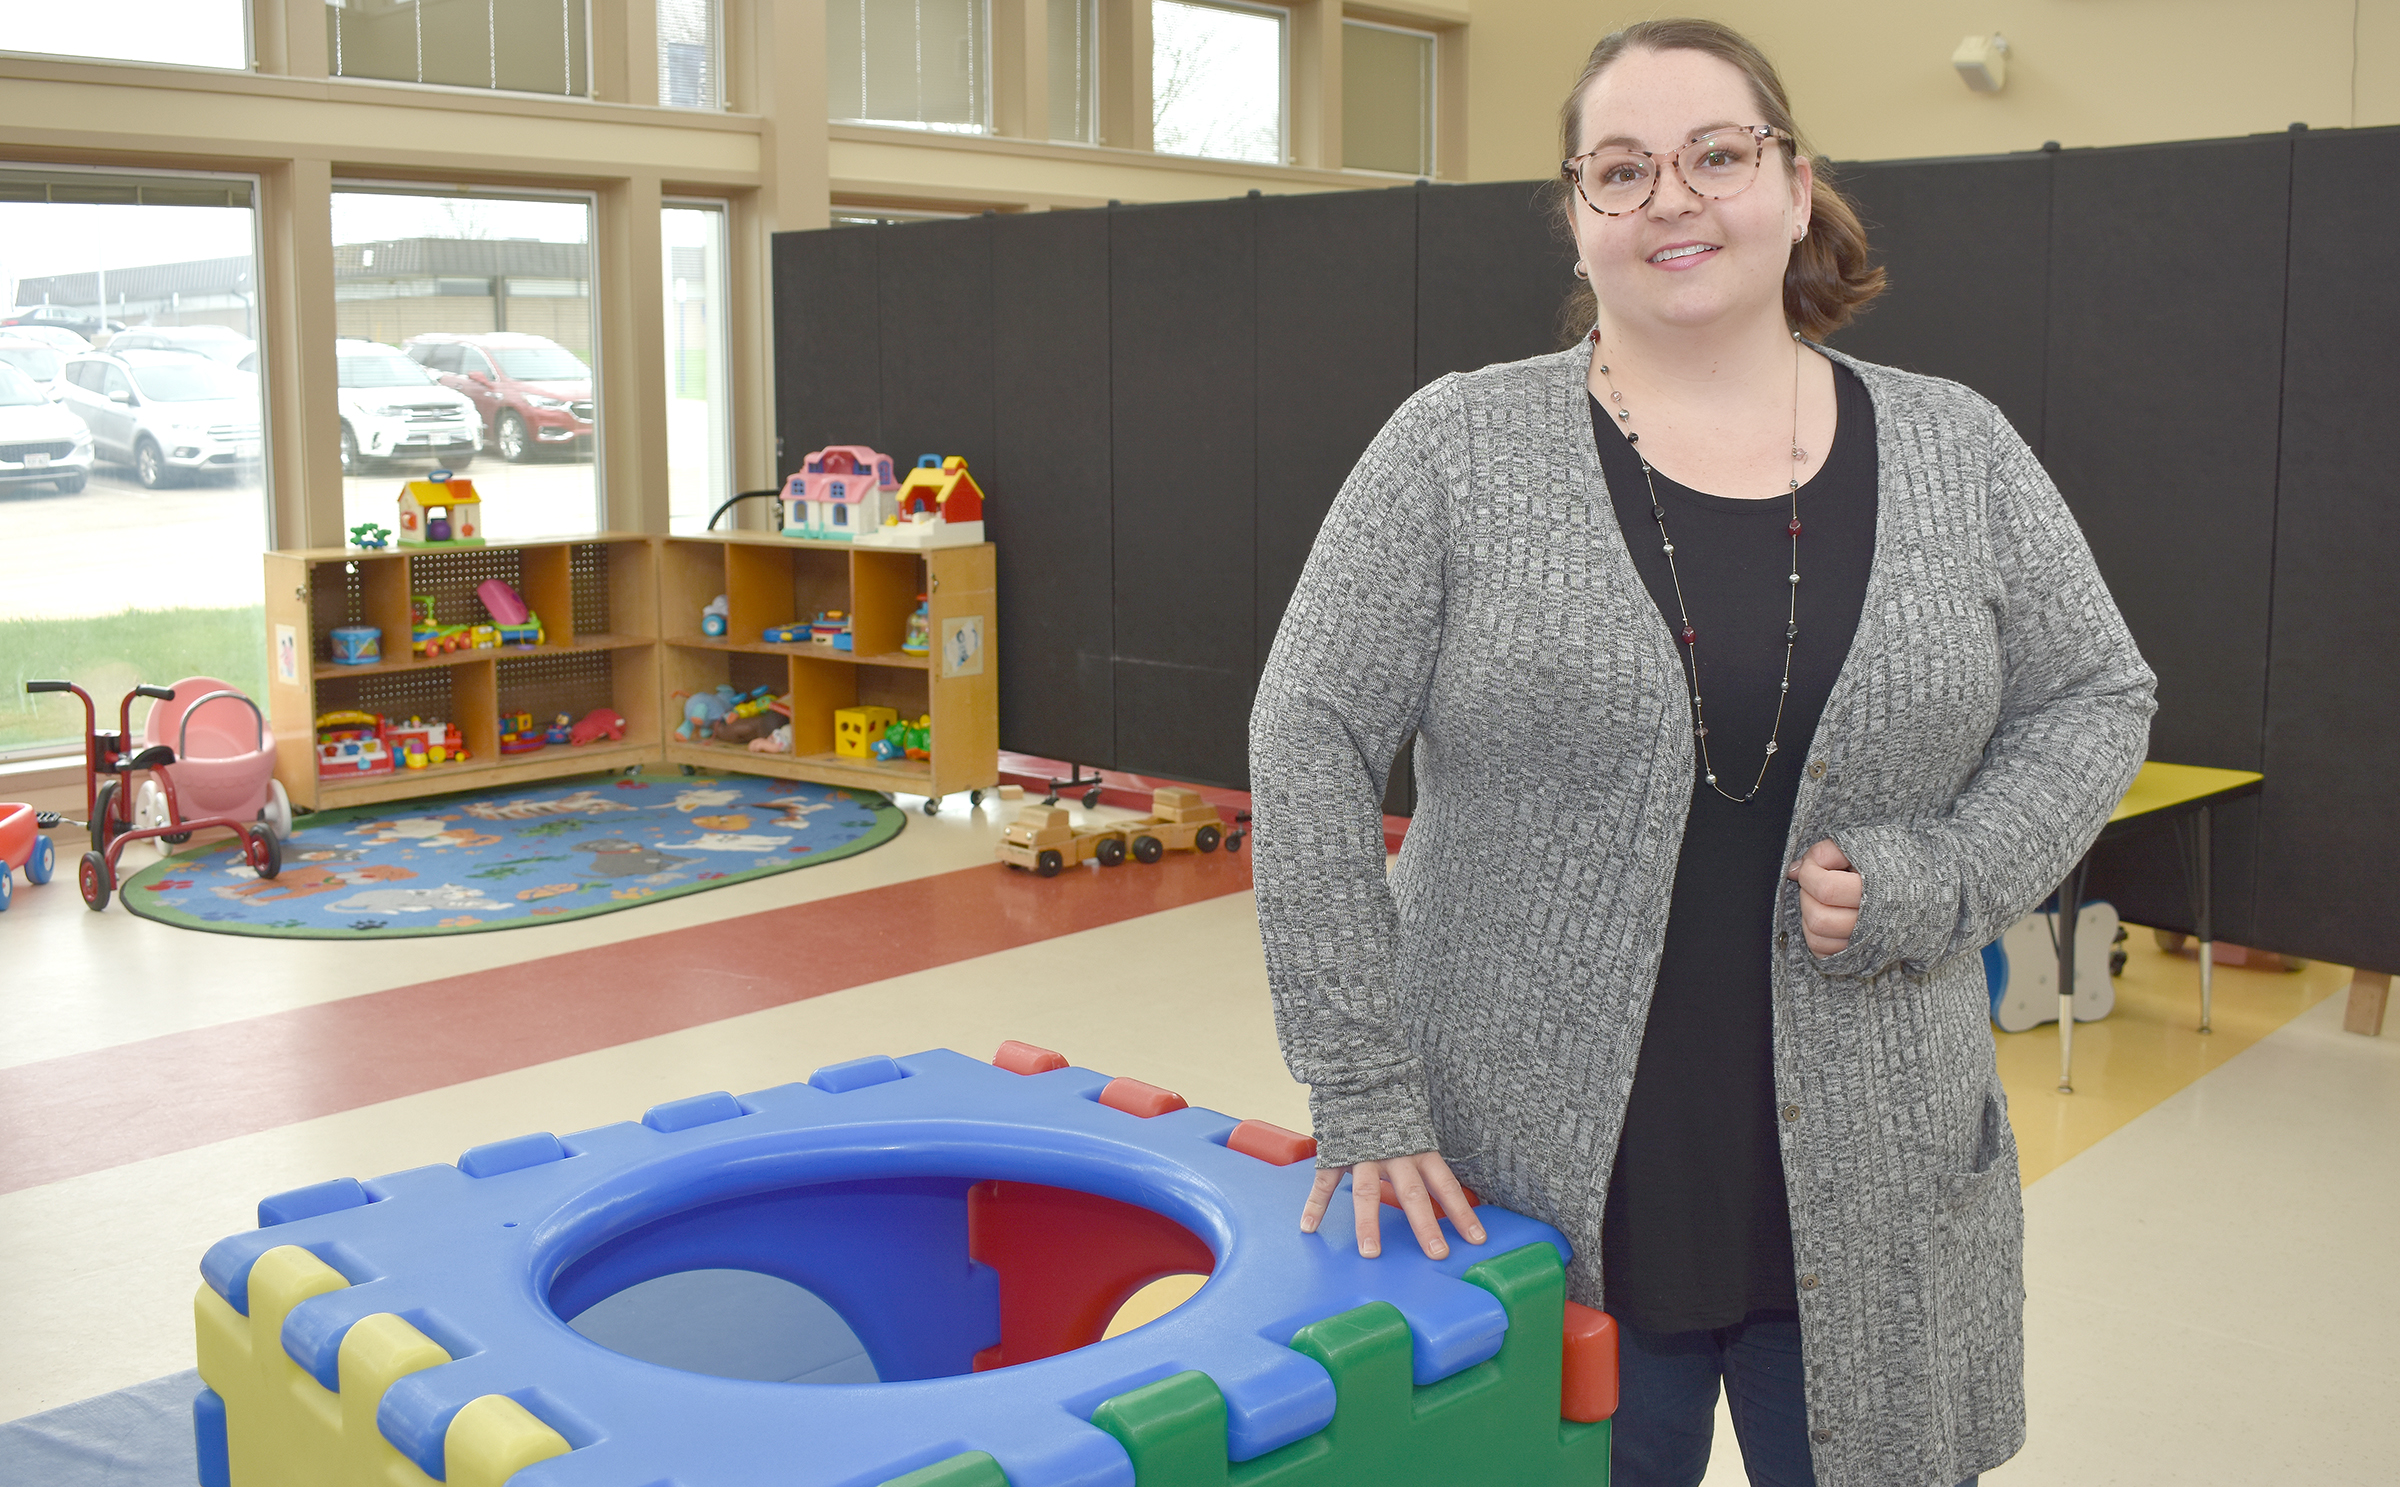 Female student standing in children's play area.